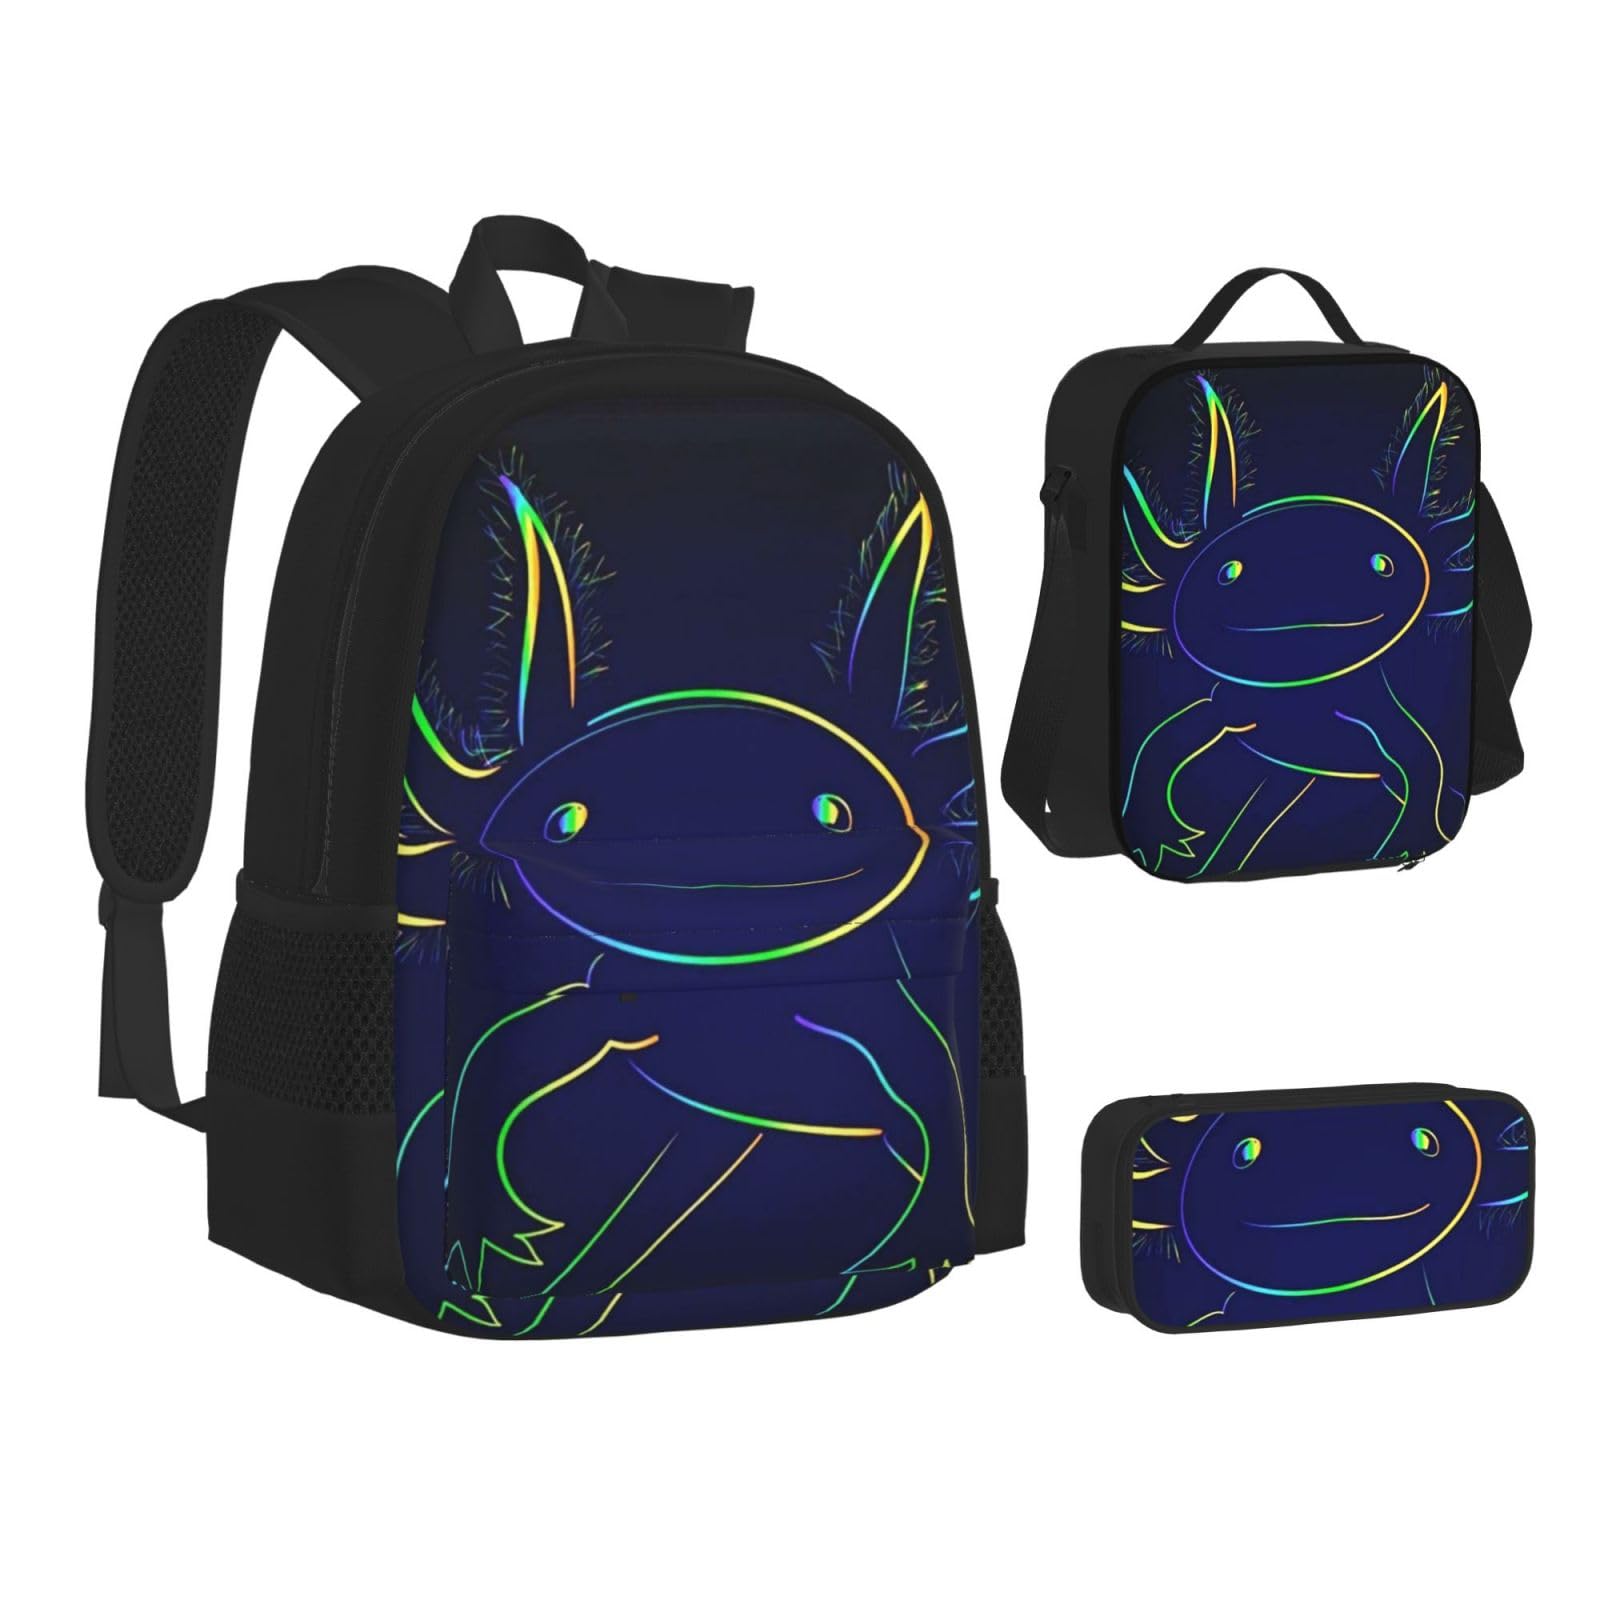 DICITNET Stylized Rainbow Axolotl Backpack Set for Perfect For Travel(Backpack + Pencil Case + Lunchbag Combination)